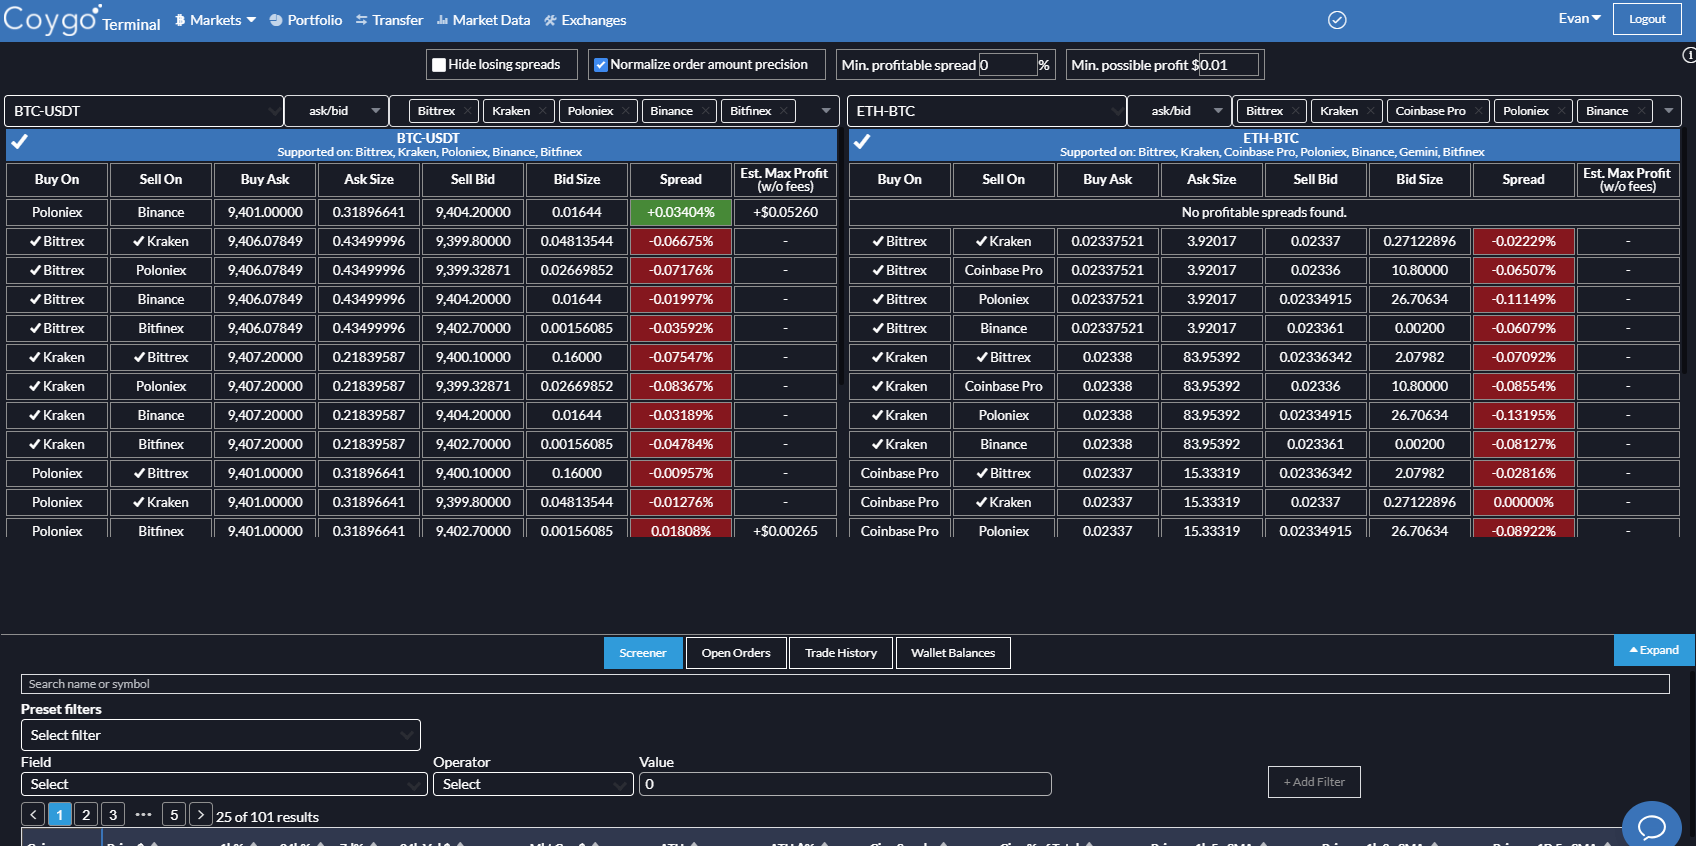 Real-time arbitrage spreads